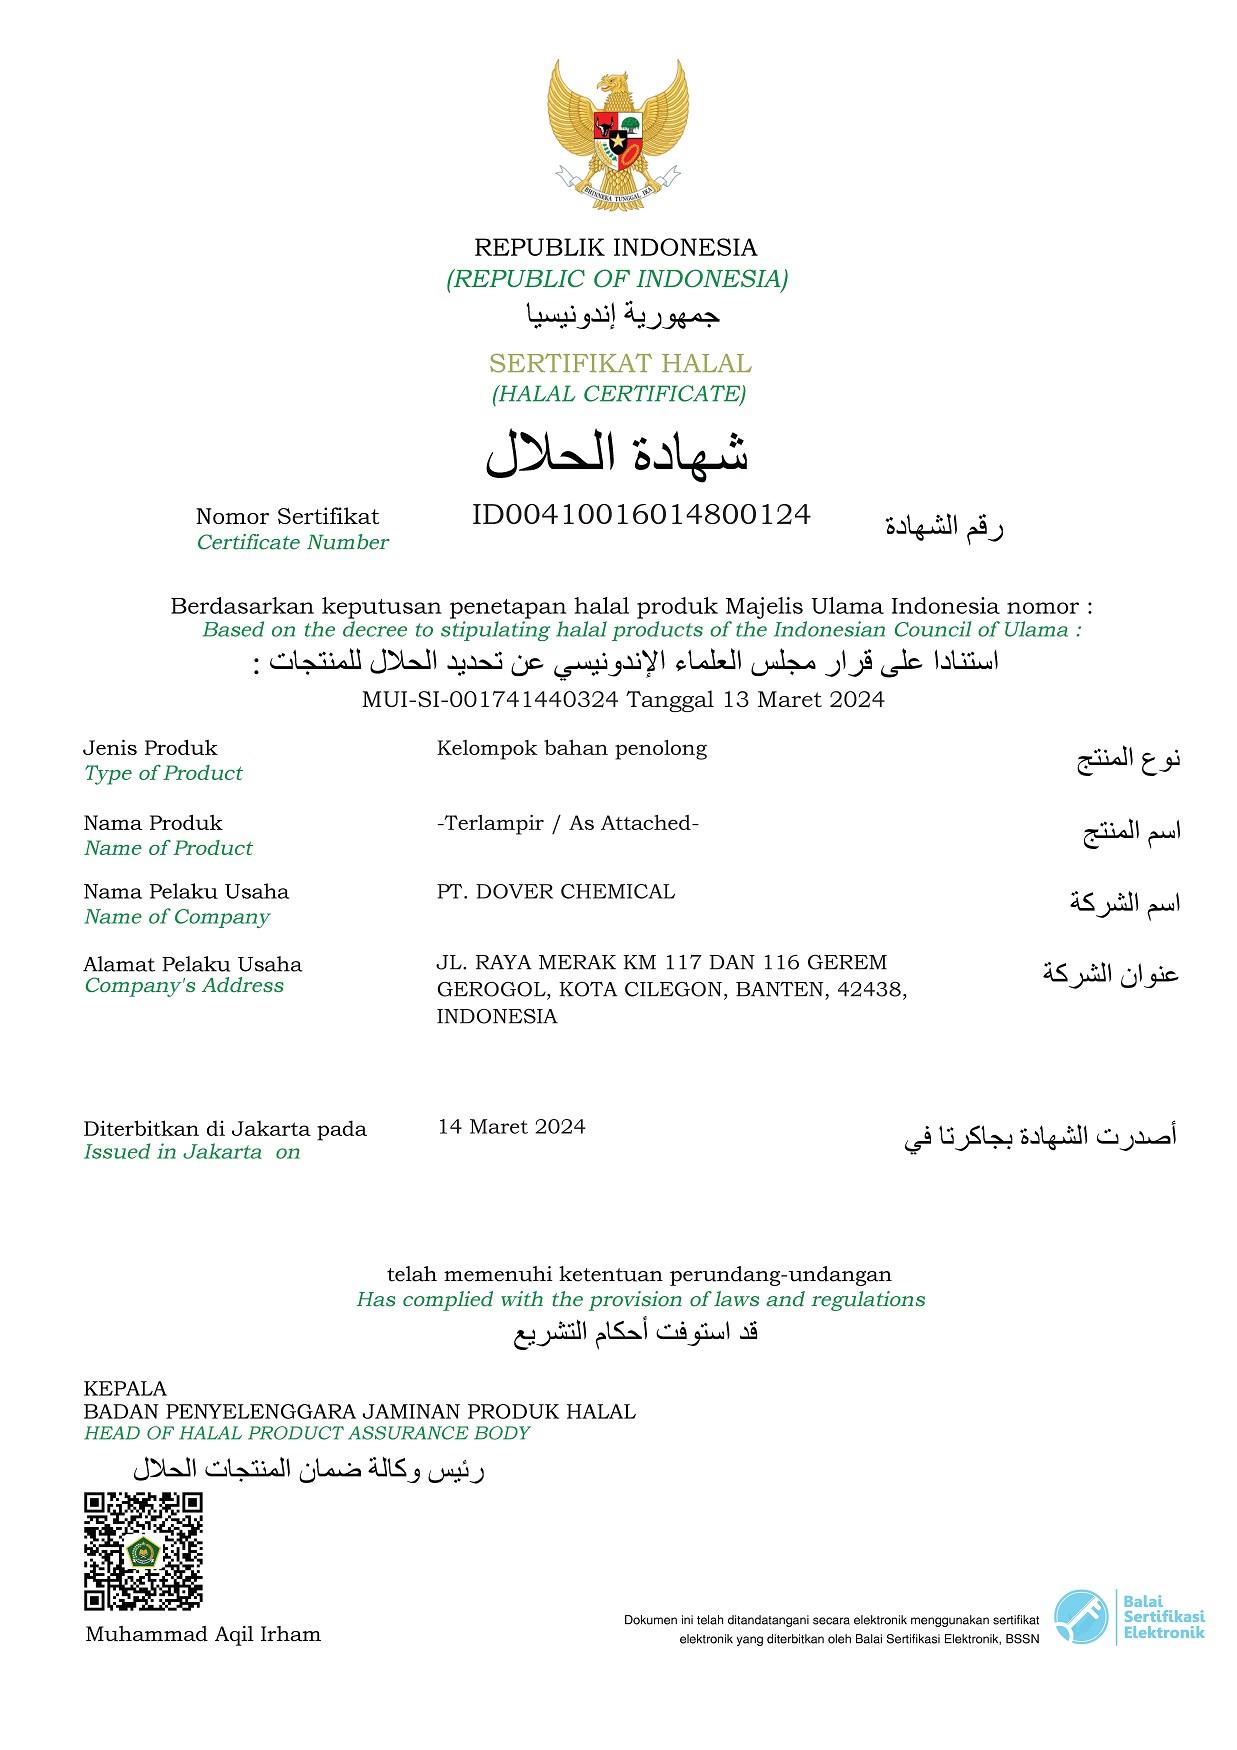 Halal Certificate for Auxiliary Ingredient Group - Dovative Stearate